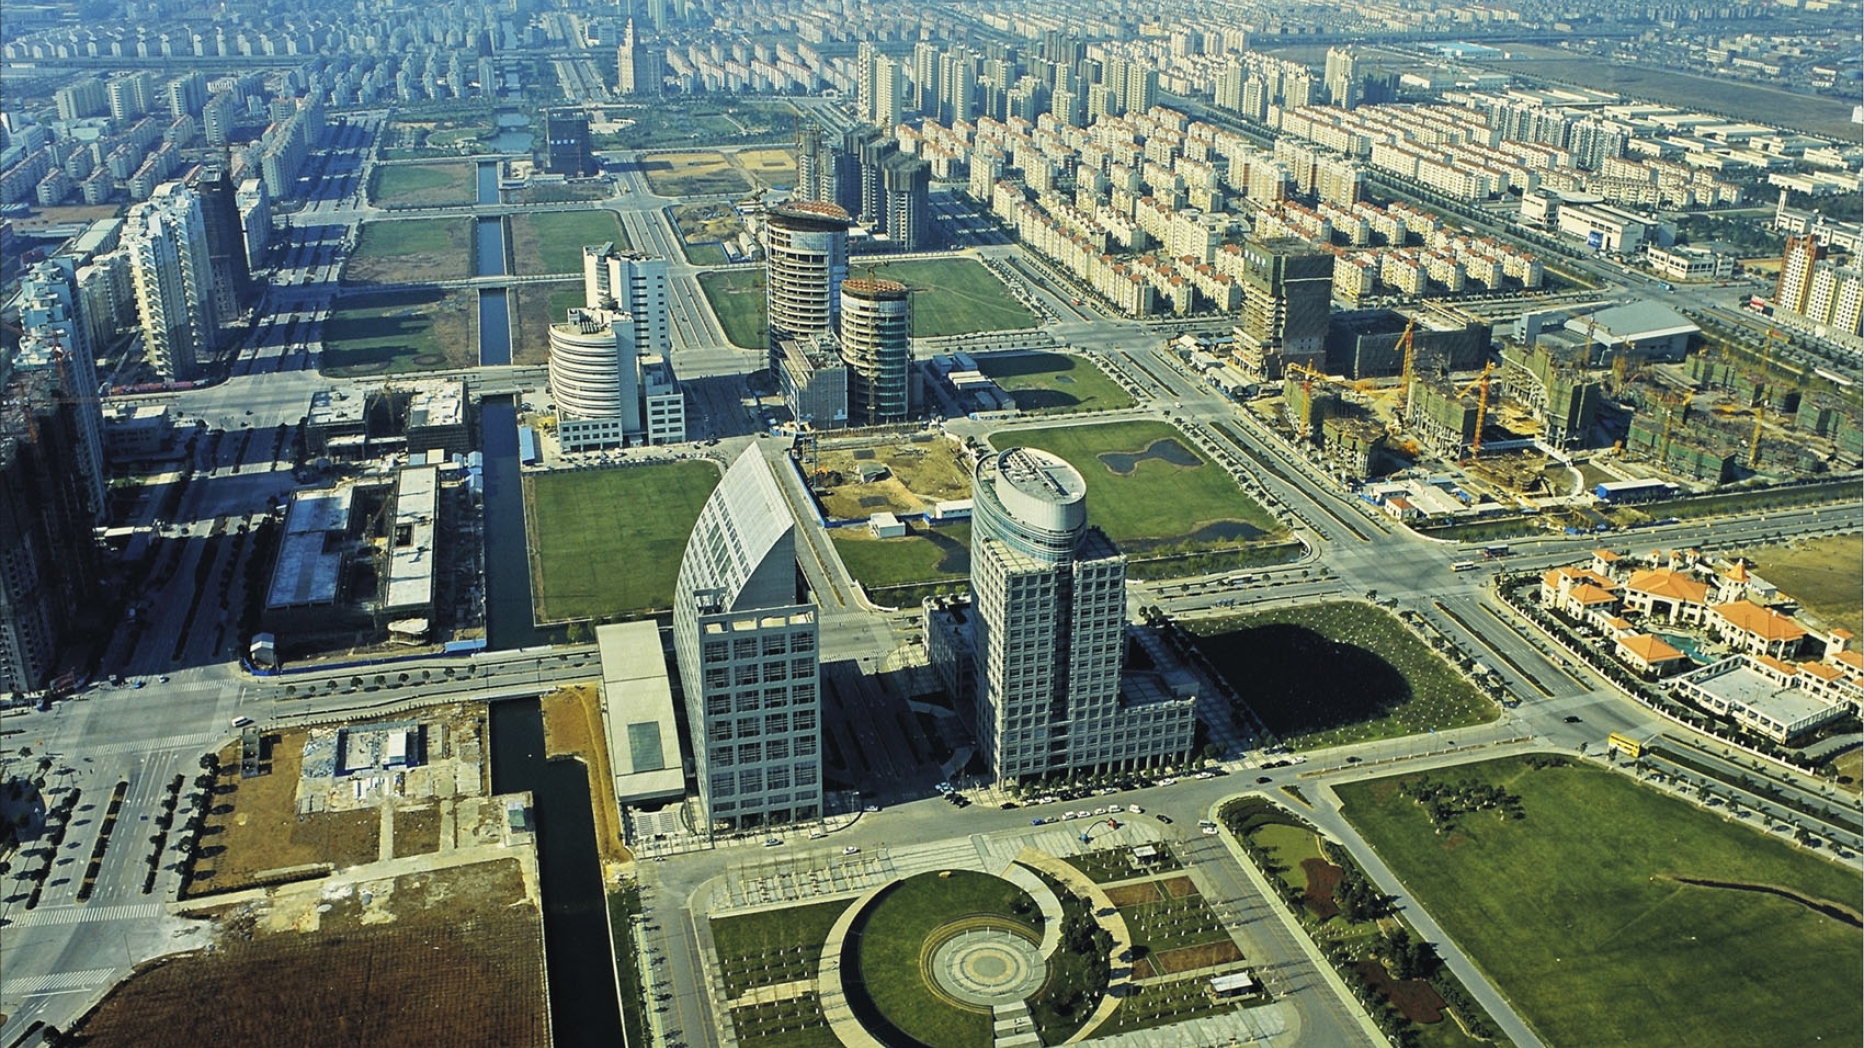 Photograph of Suzhou Industrial Park